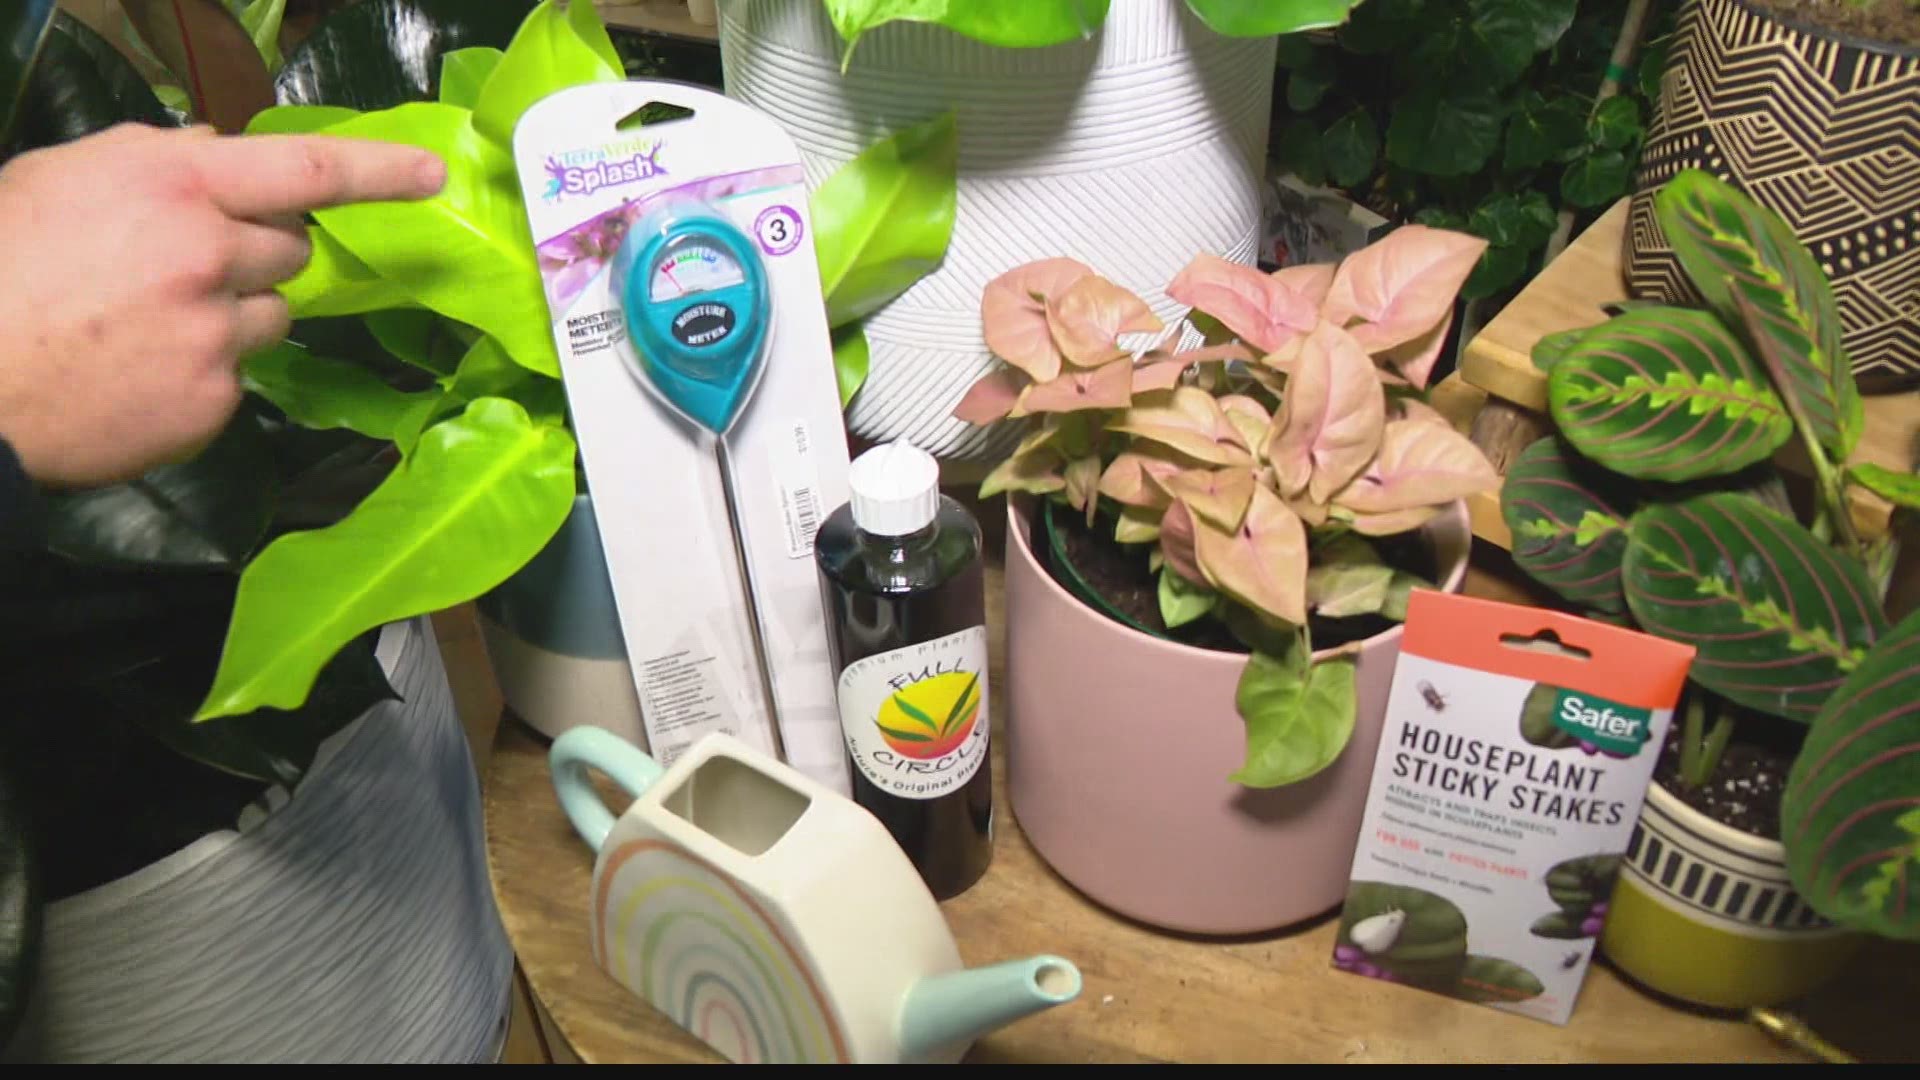 House plants need special care during colder weather.